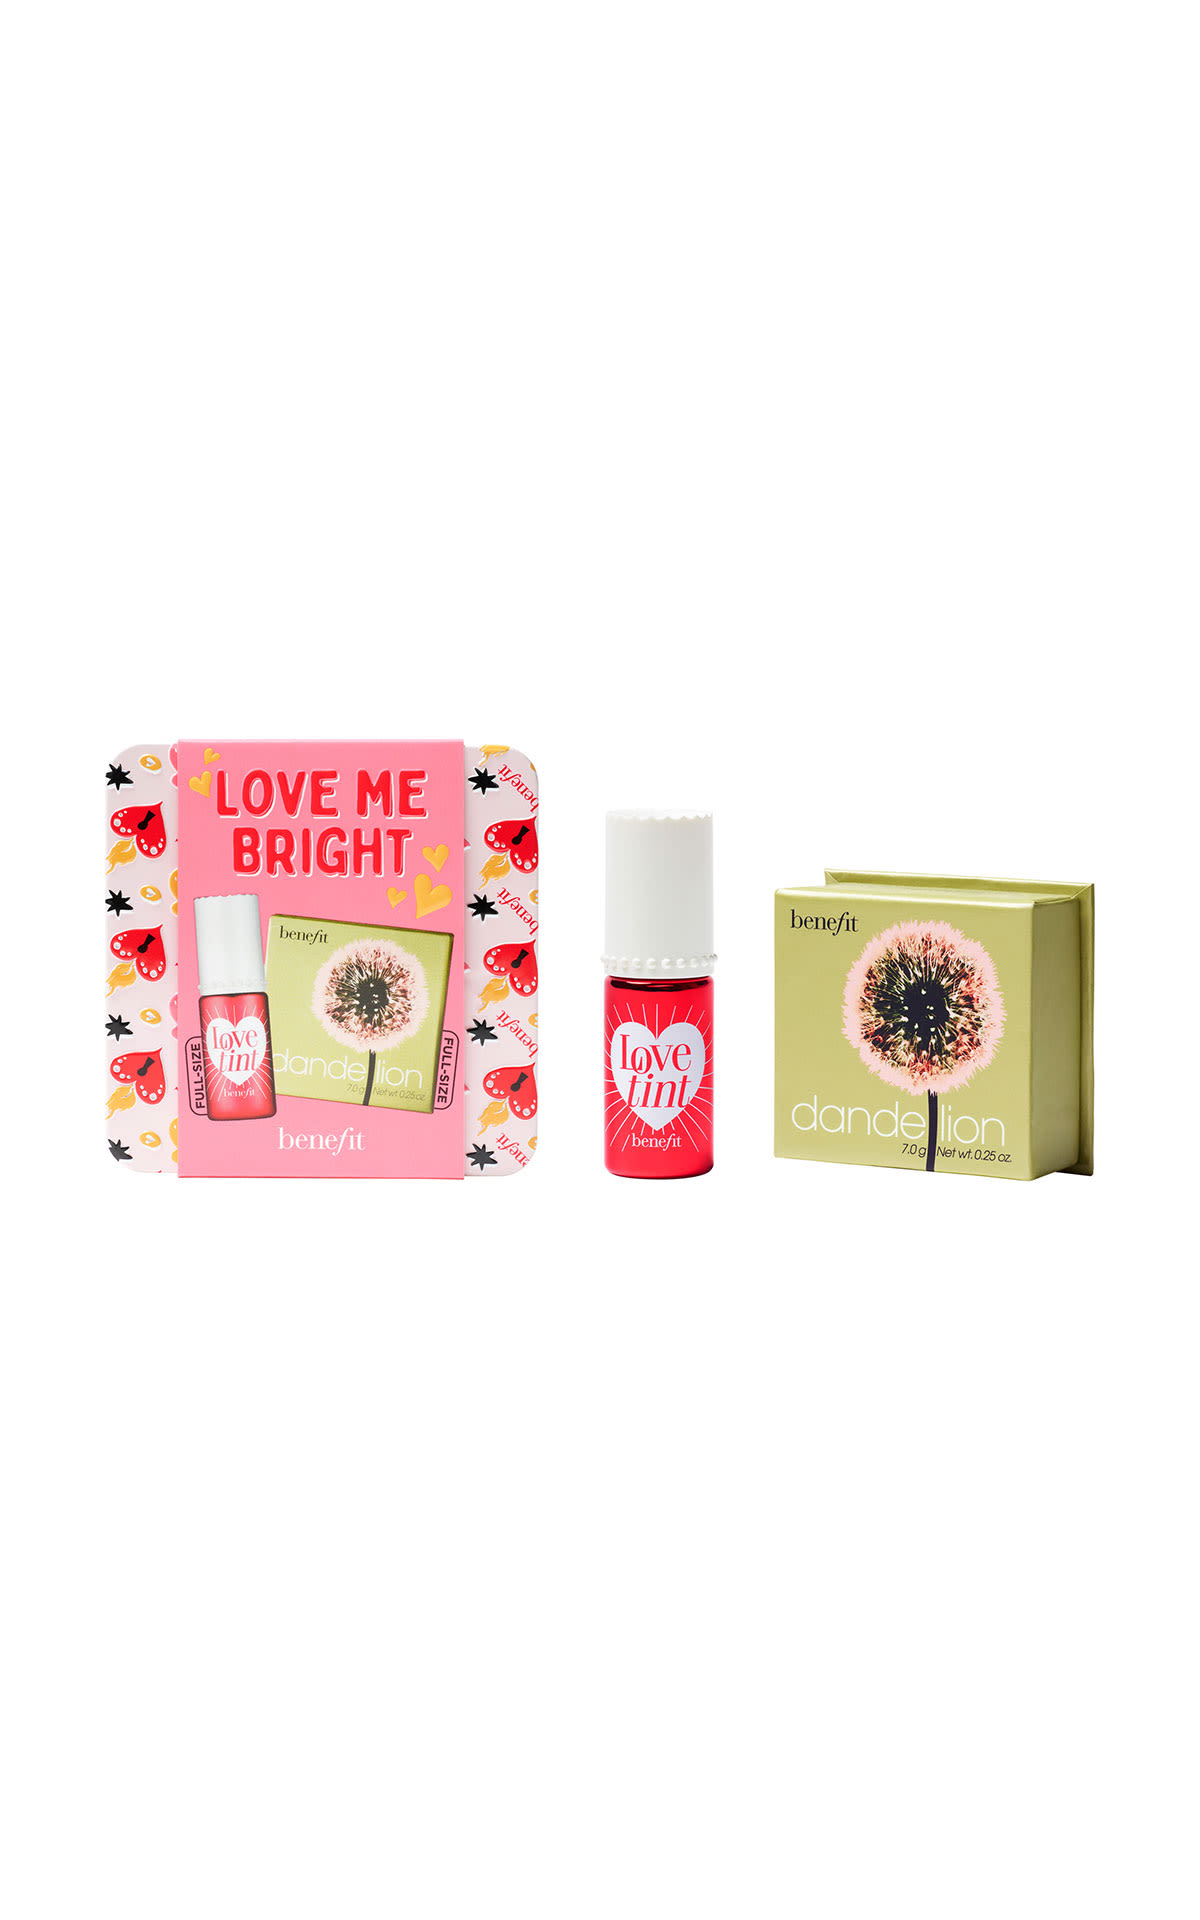 Benefit Cosmetics Love me bright  from Bicester Village